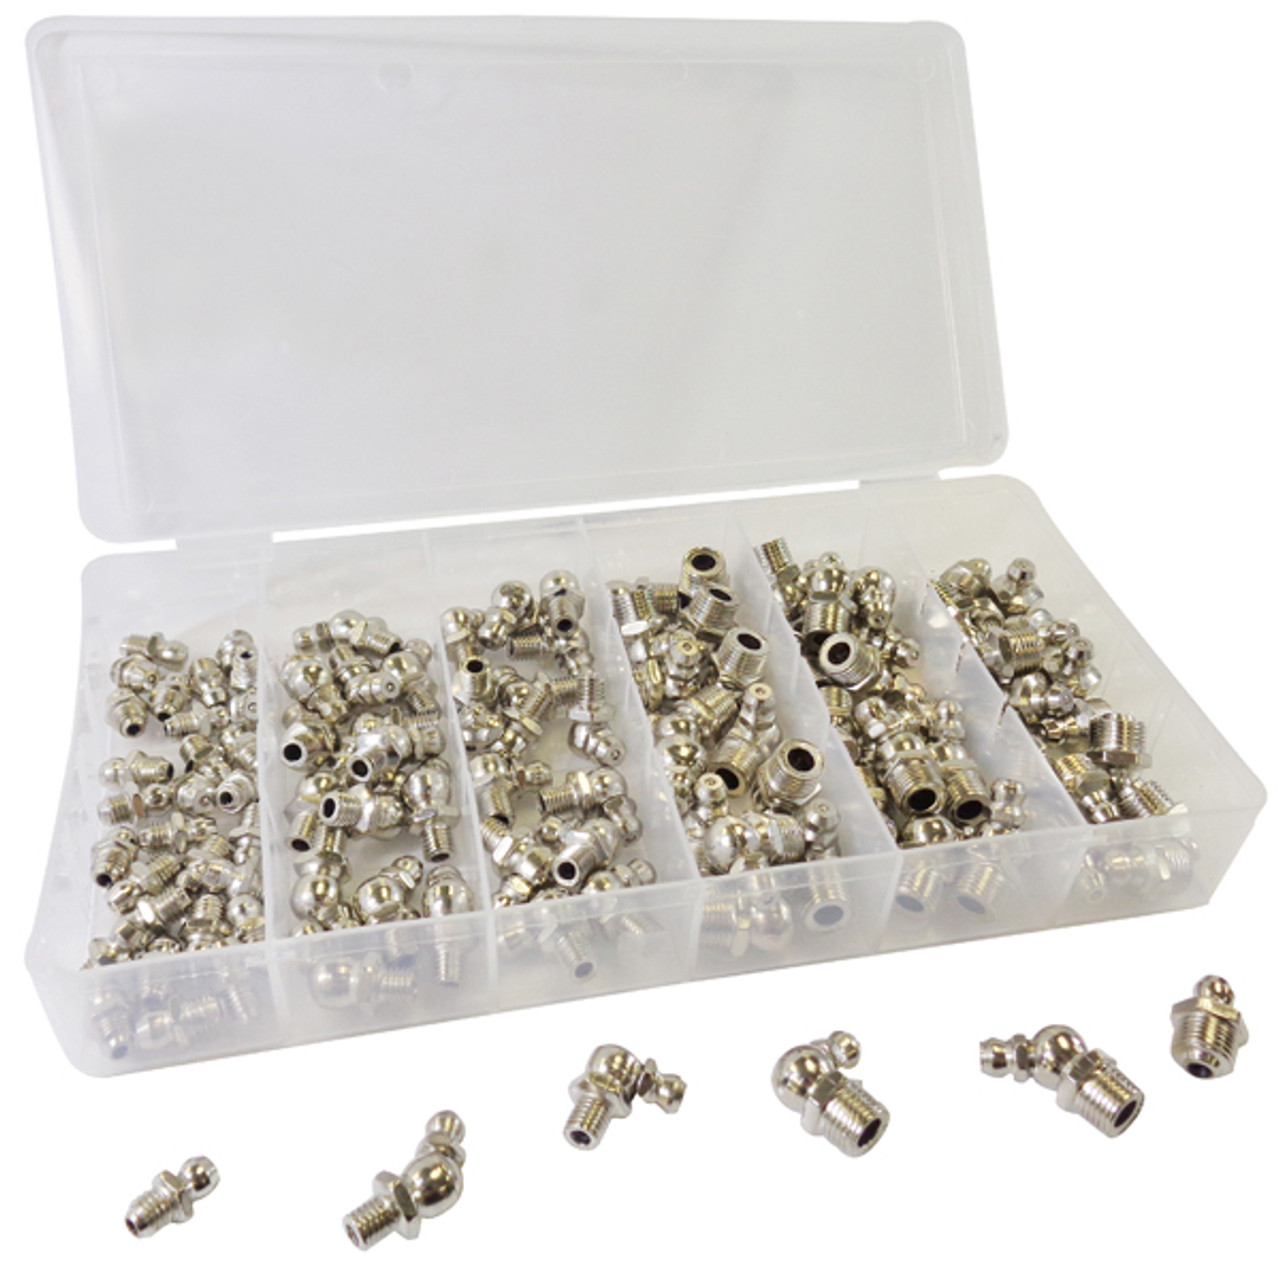 110 Pc. SAE Hydraulic Grease Fitting Assortment